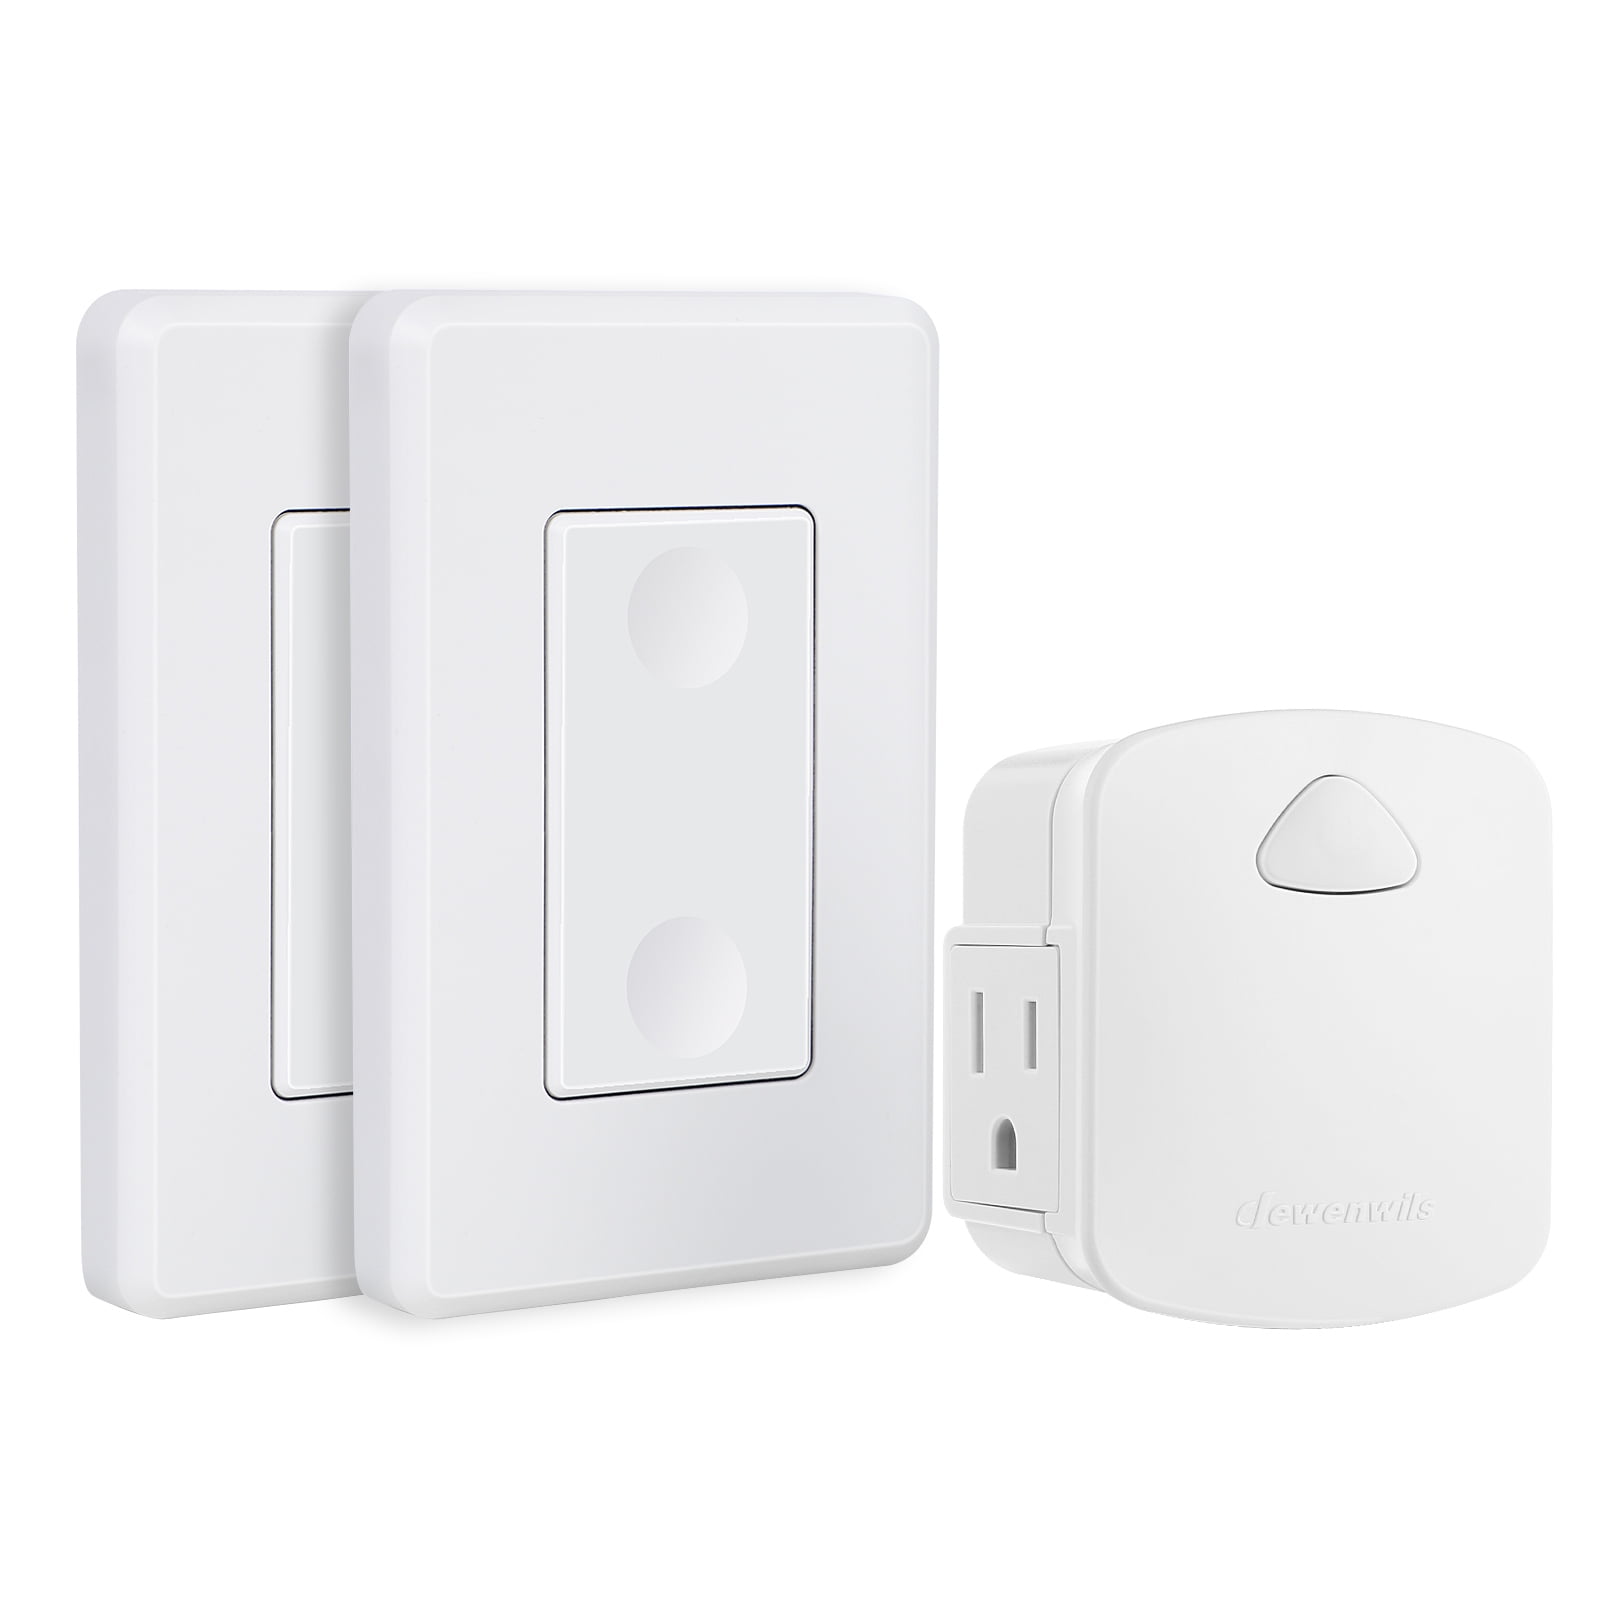 WavePoint 125V/15A Wireless Outlet Plug with Wall Switch & Braille (On/Off)  Mark (1 US Outlet + 1 Remote Control) - White